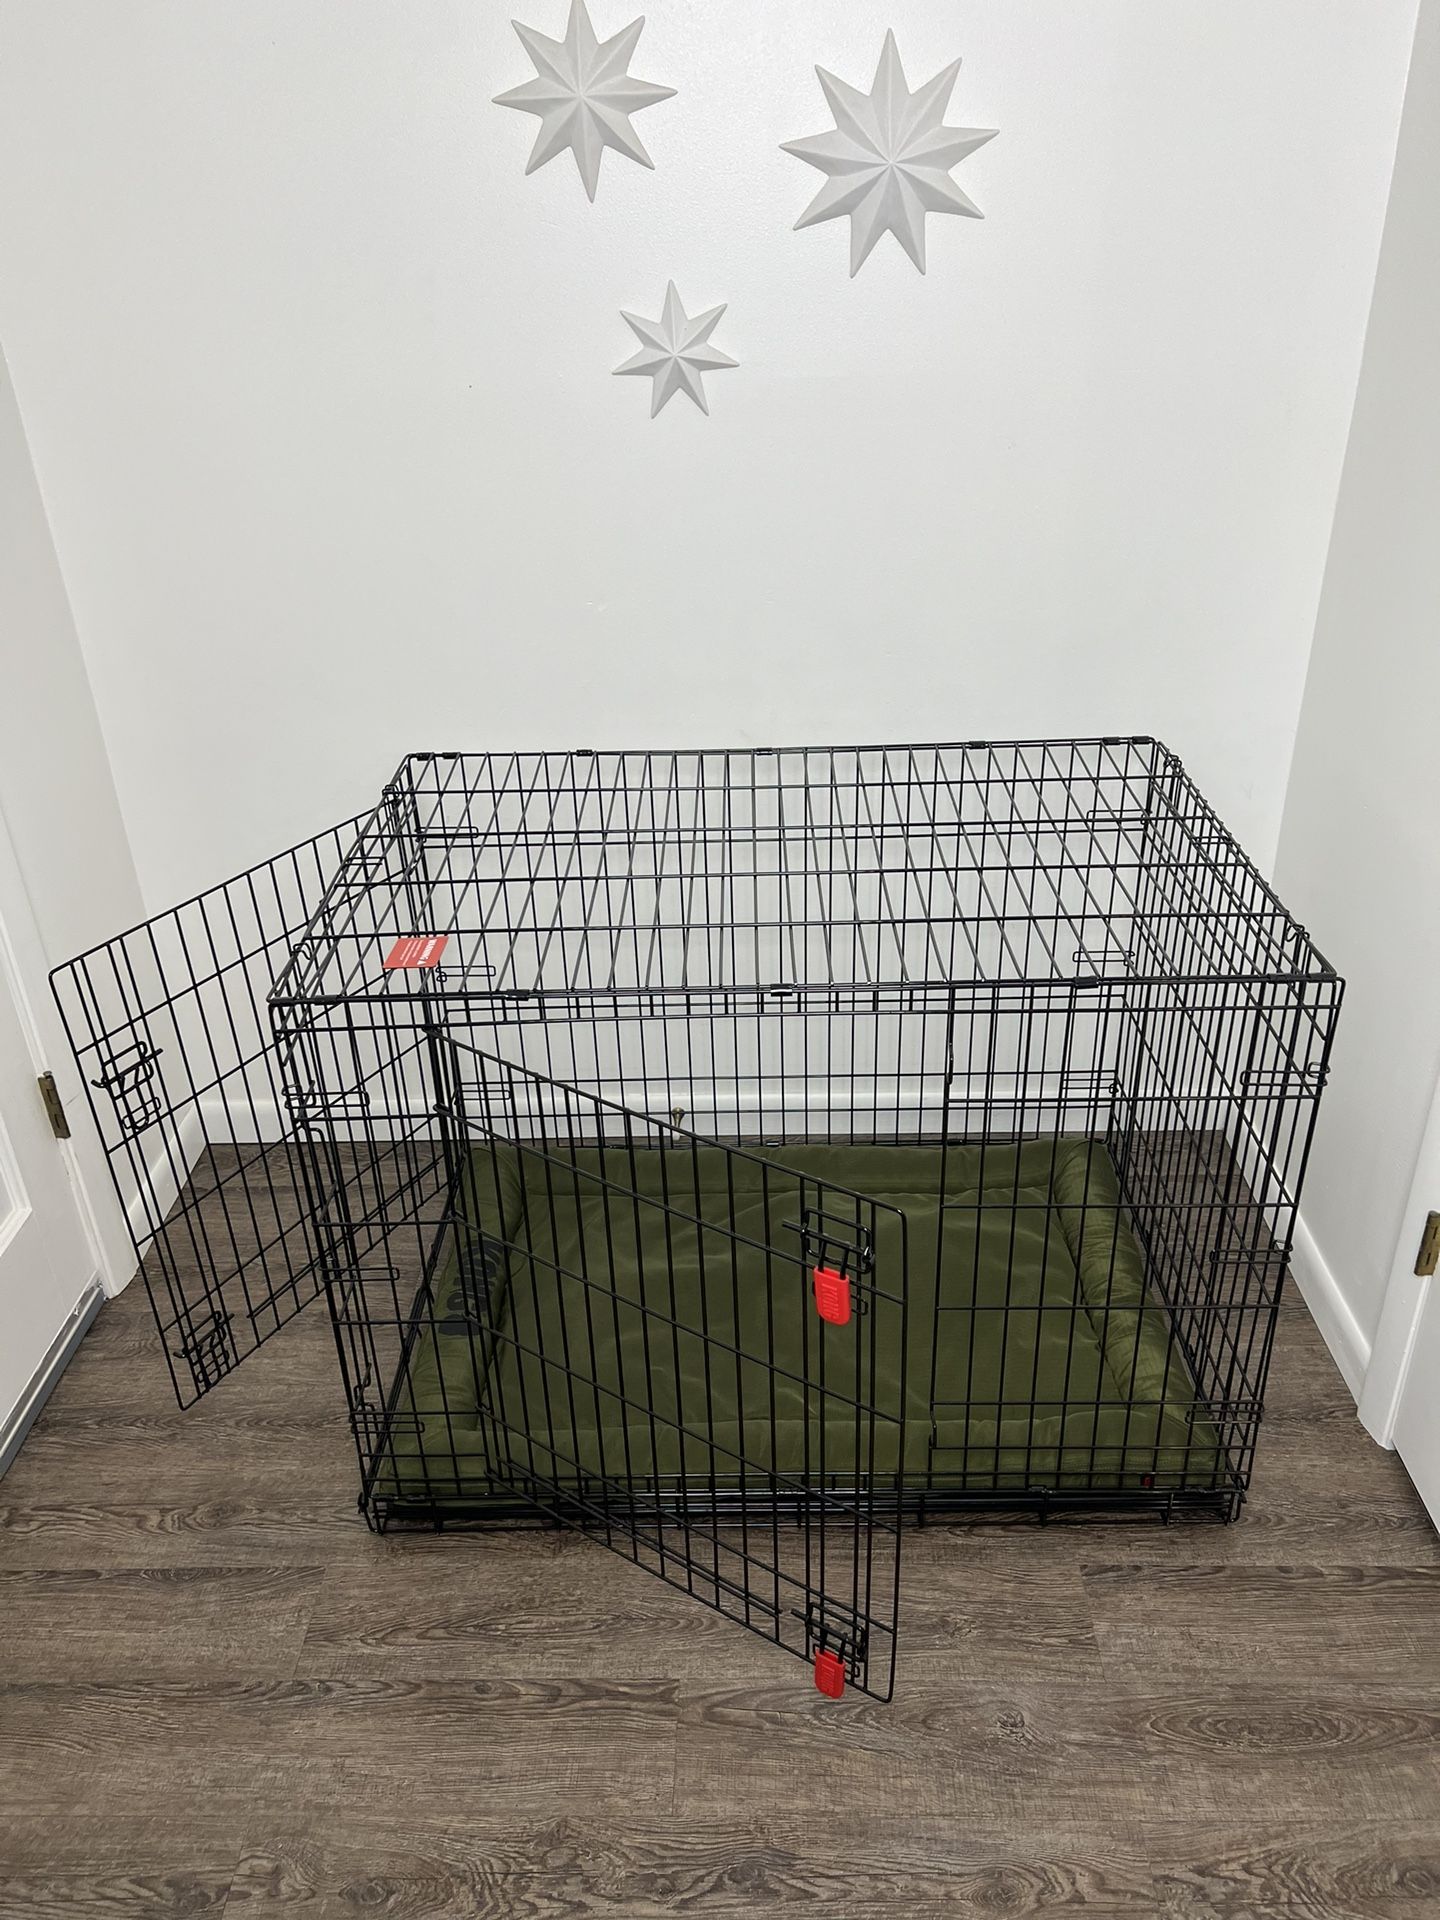 KONG Ultra-Strong Double Door Wire Dog Crate with Divider Panel with KONG Durable Crate Dog Mat -Cage 